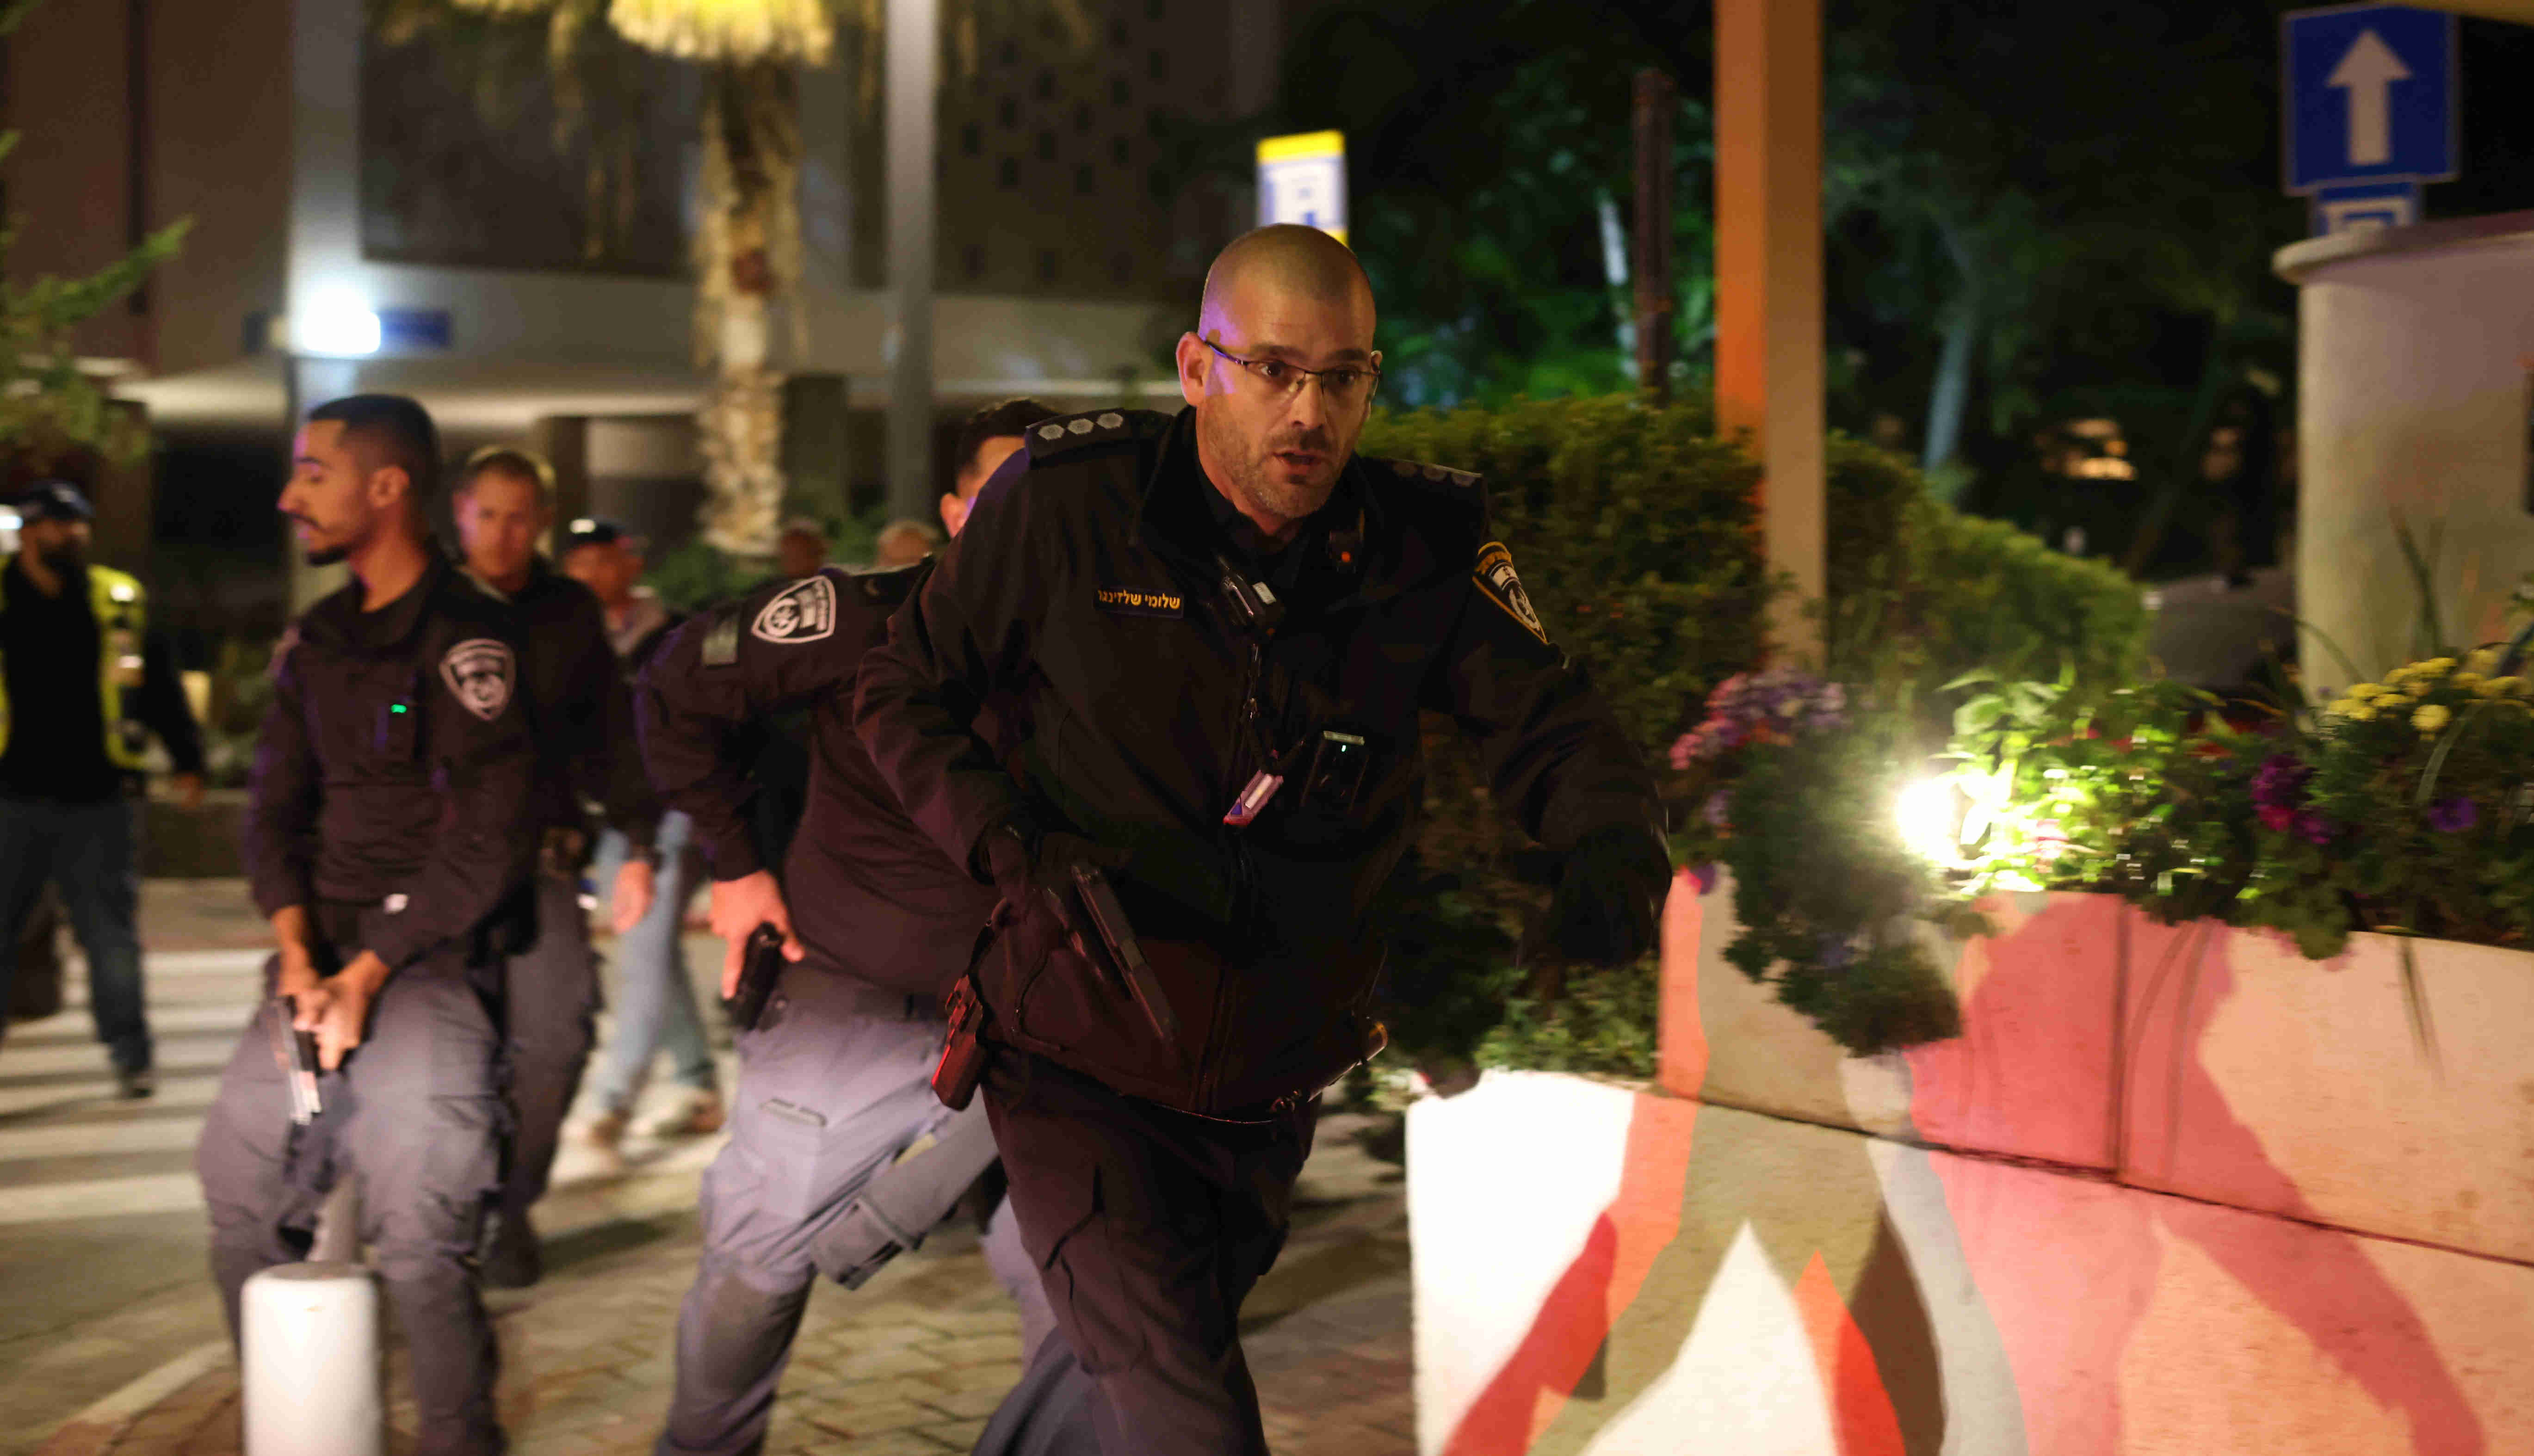 Israeli police officer work to secure the scene of a shooting in Tel Aviv on 9 March 2023 (MEE/Oren Ziv)